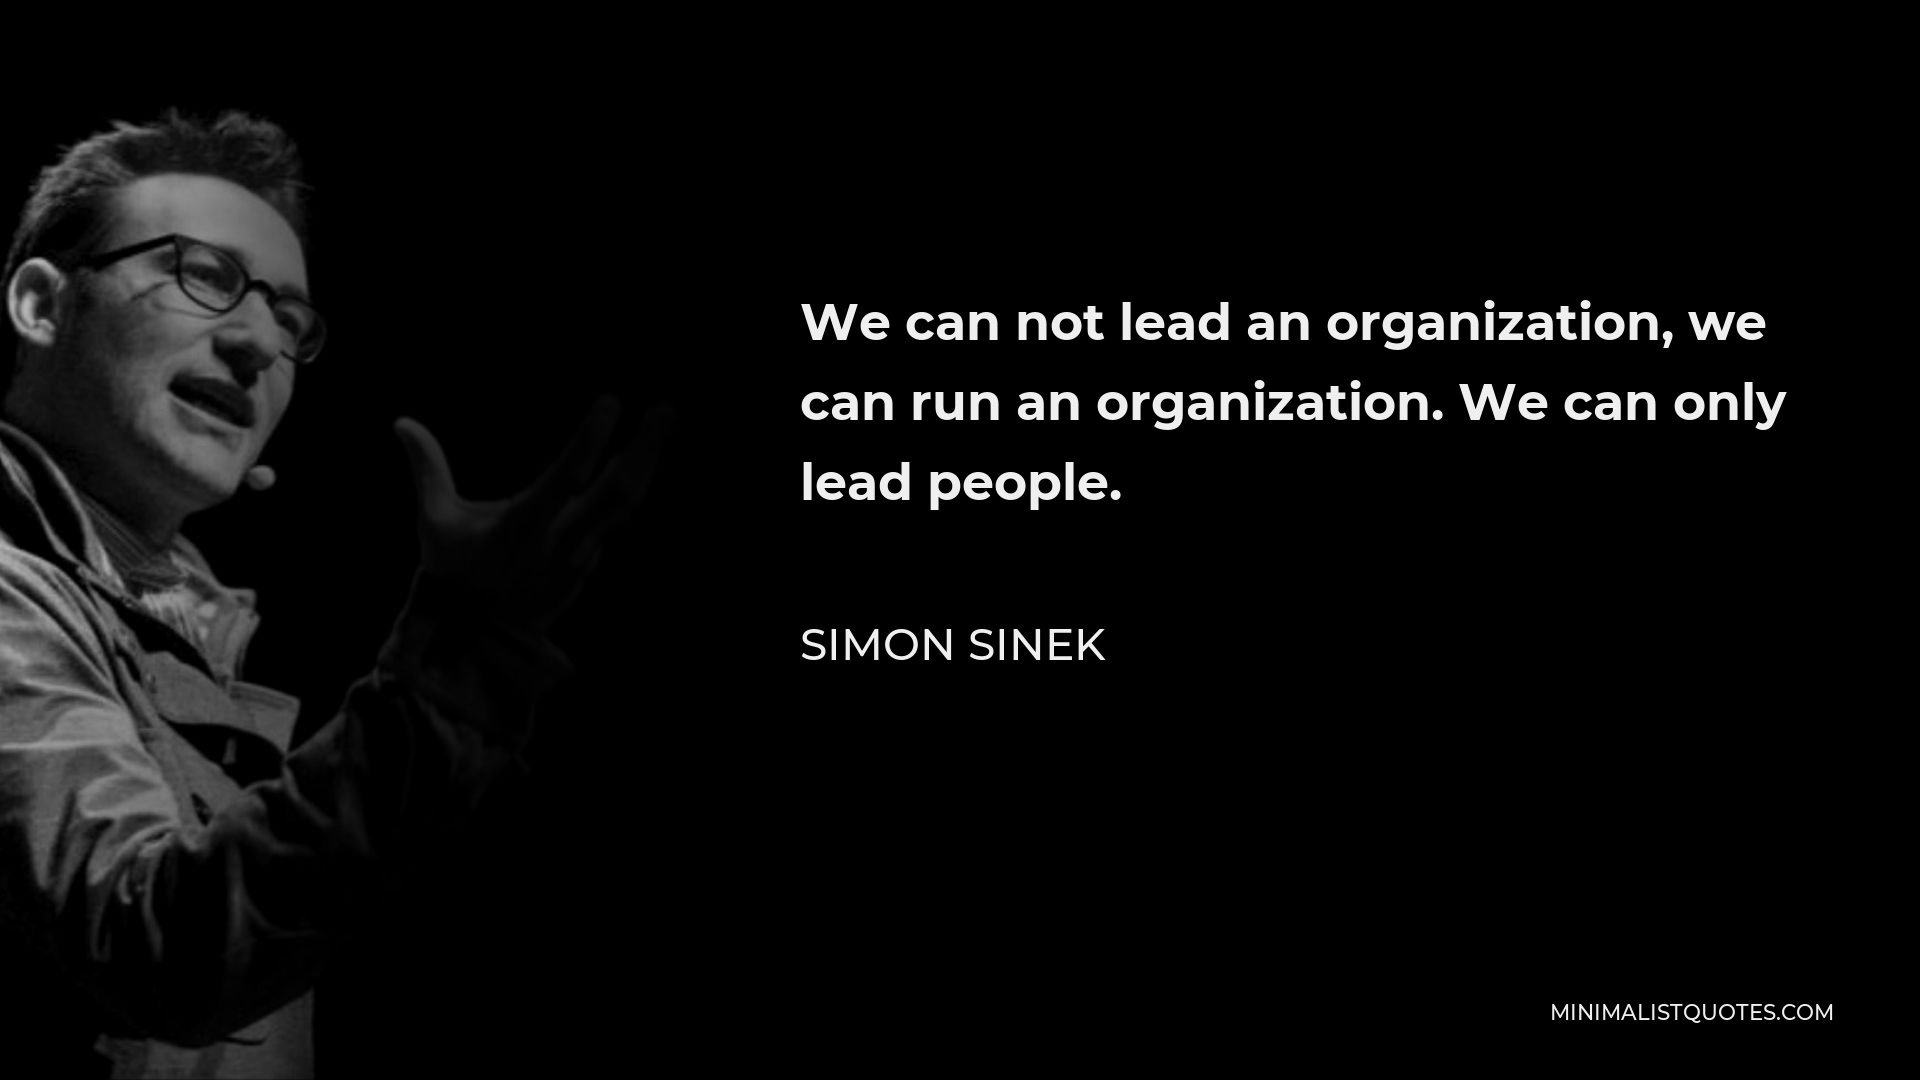 Simon Sinek Quote - We can not lead an organization, we can run an organization. We can only lead people.